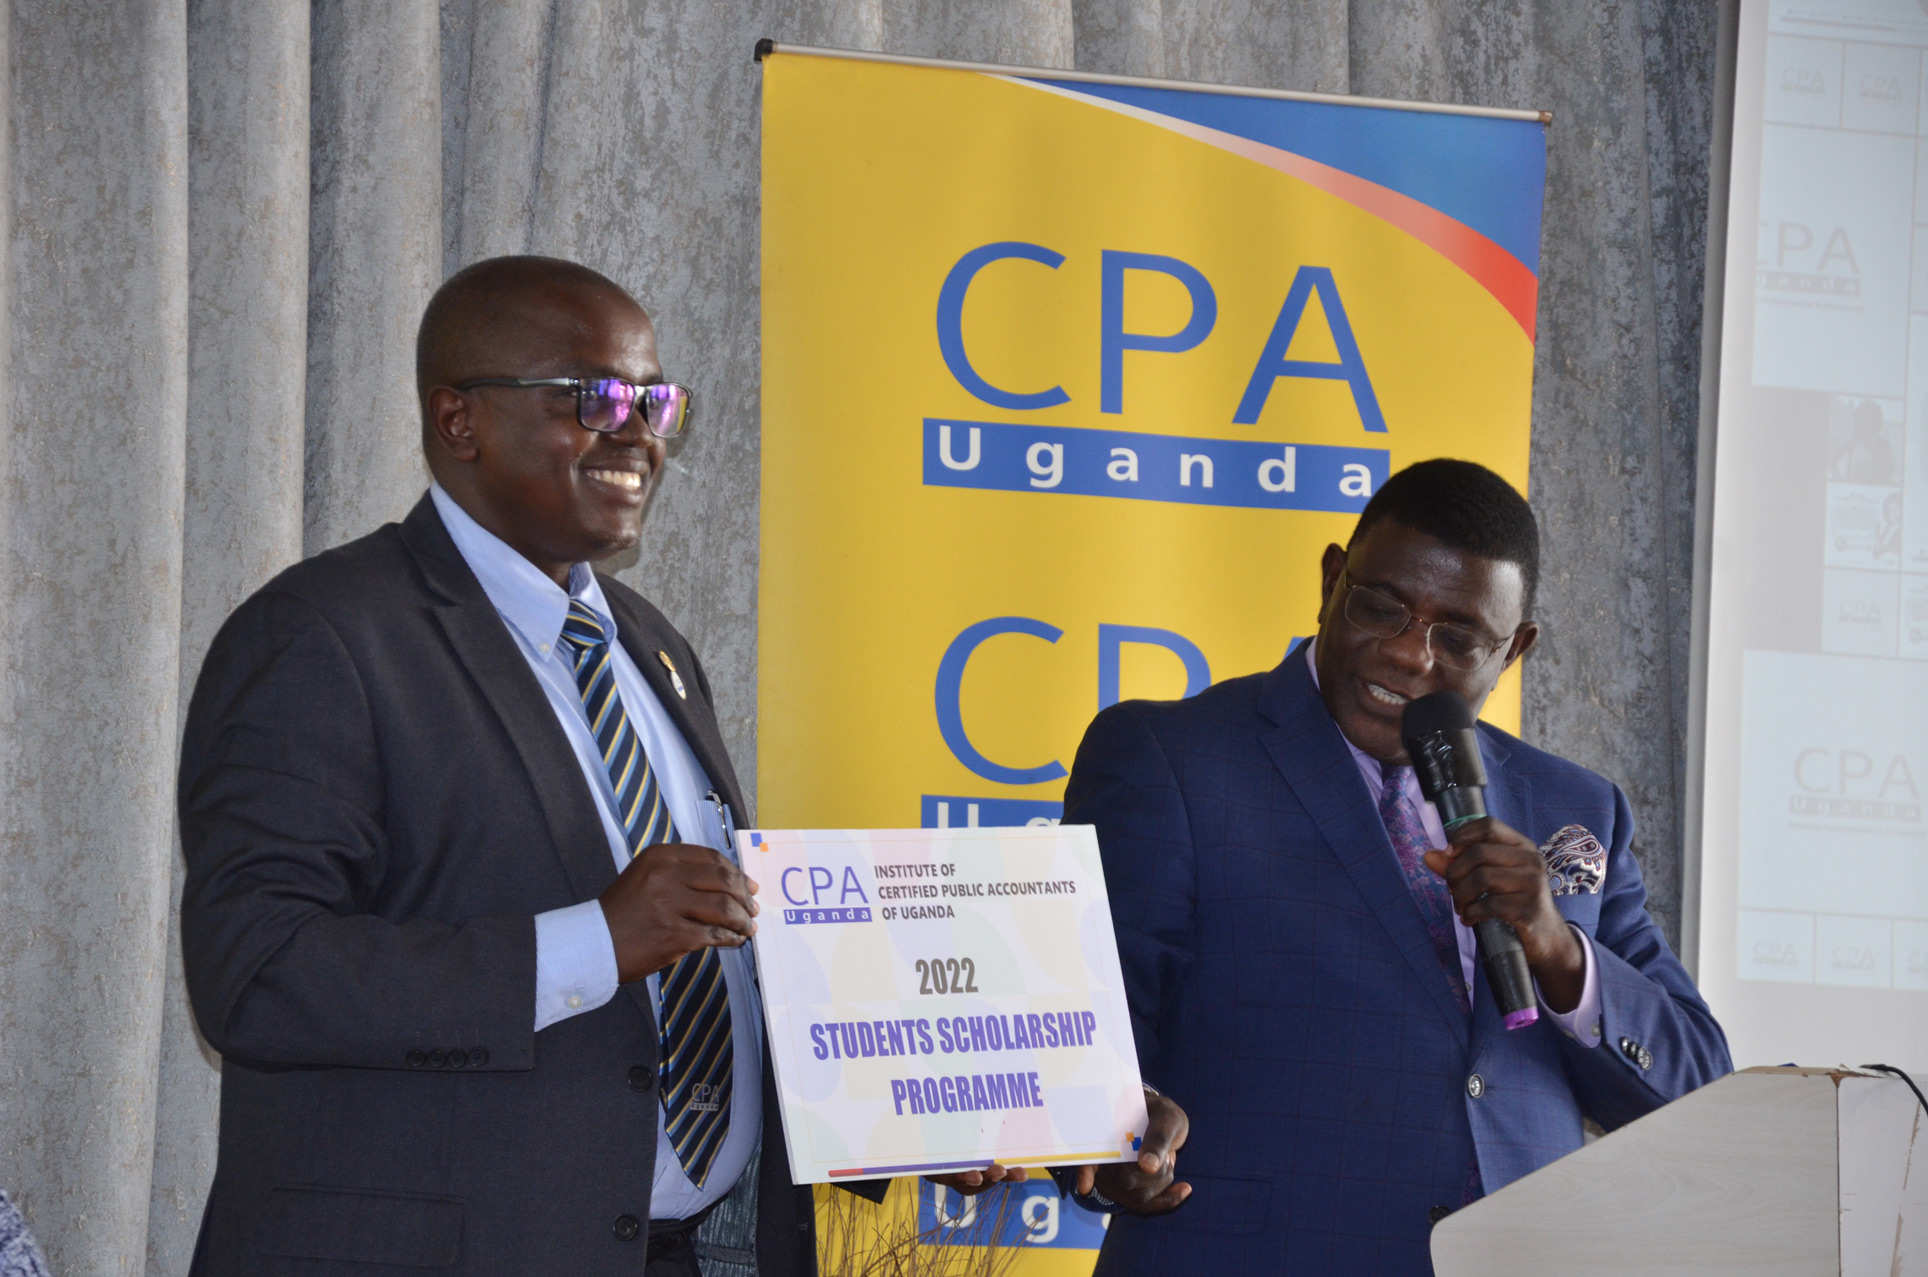 ICPAU President, CPA Constant Othieno Mayende (L) and Prof. Twaha Kaawaase (the Chief Guest) launch the 2022 Scholarships